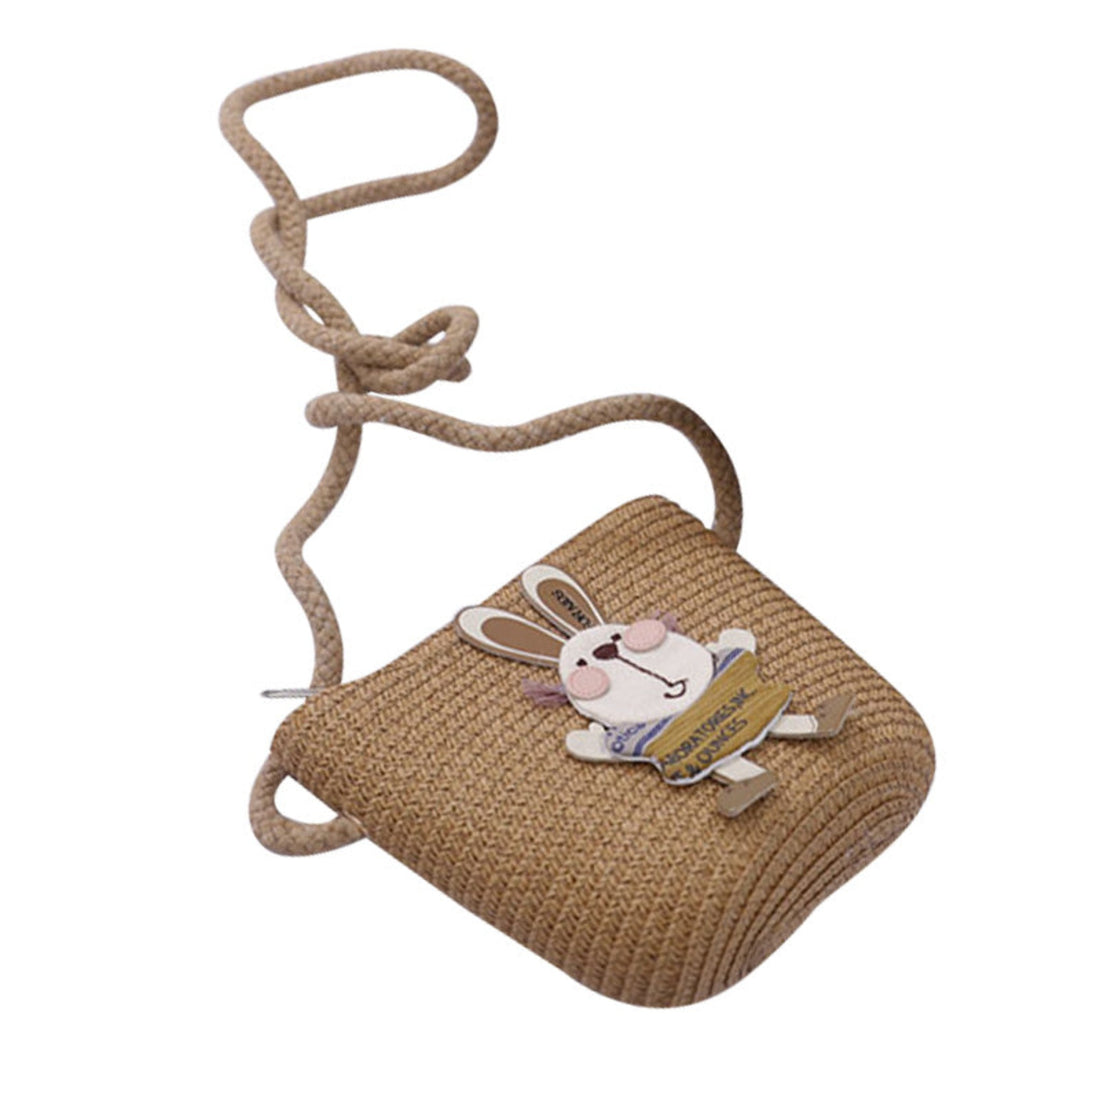 Stylish summer bag for kids with rabbit decoration